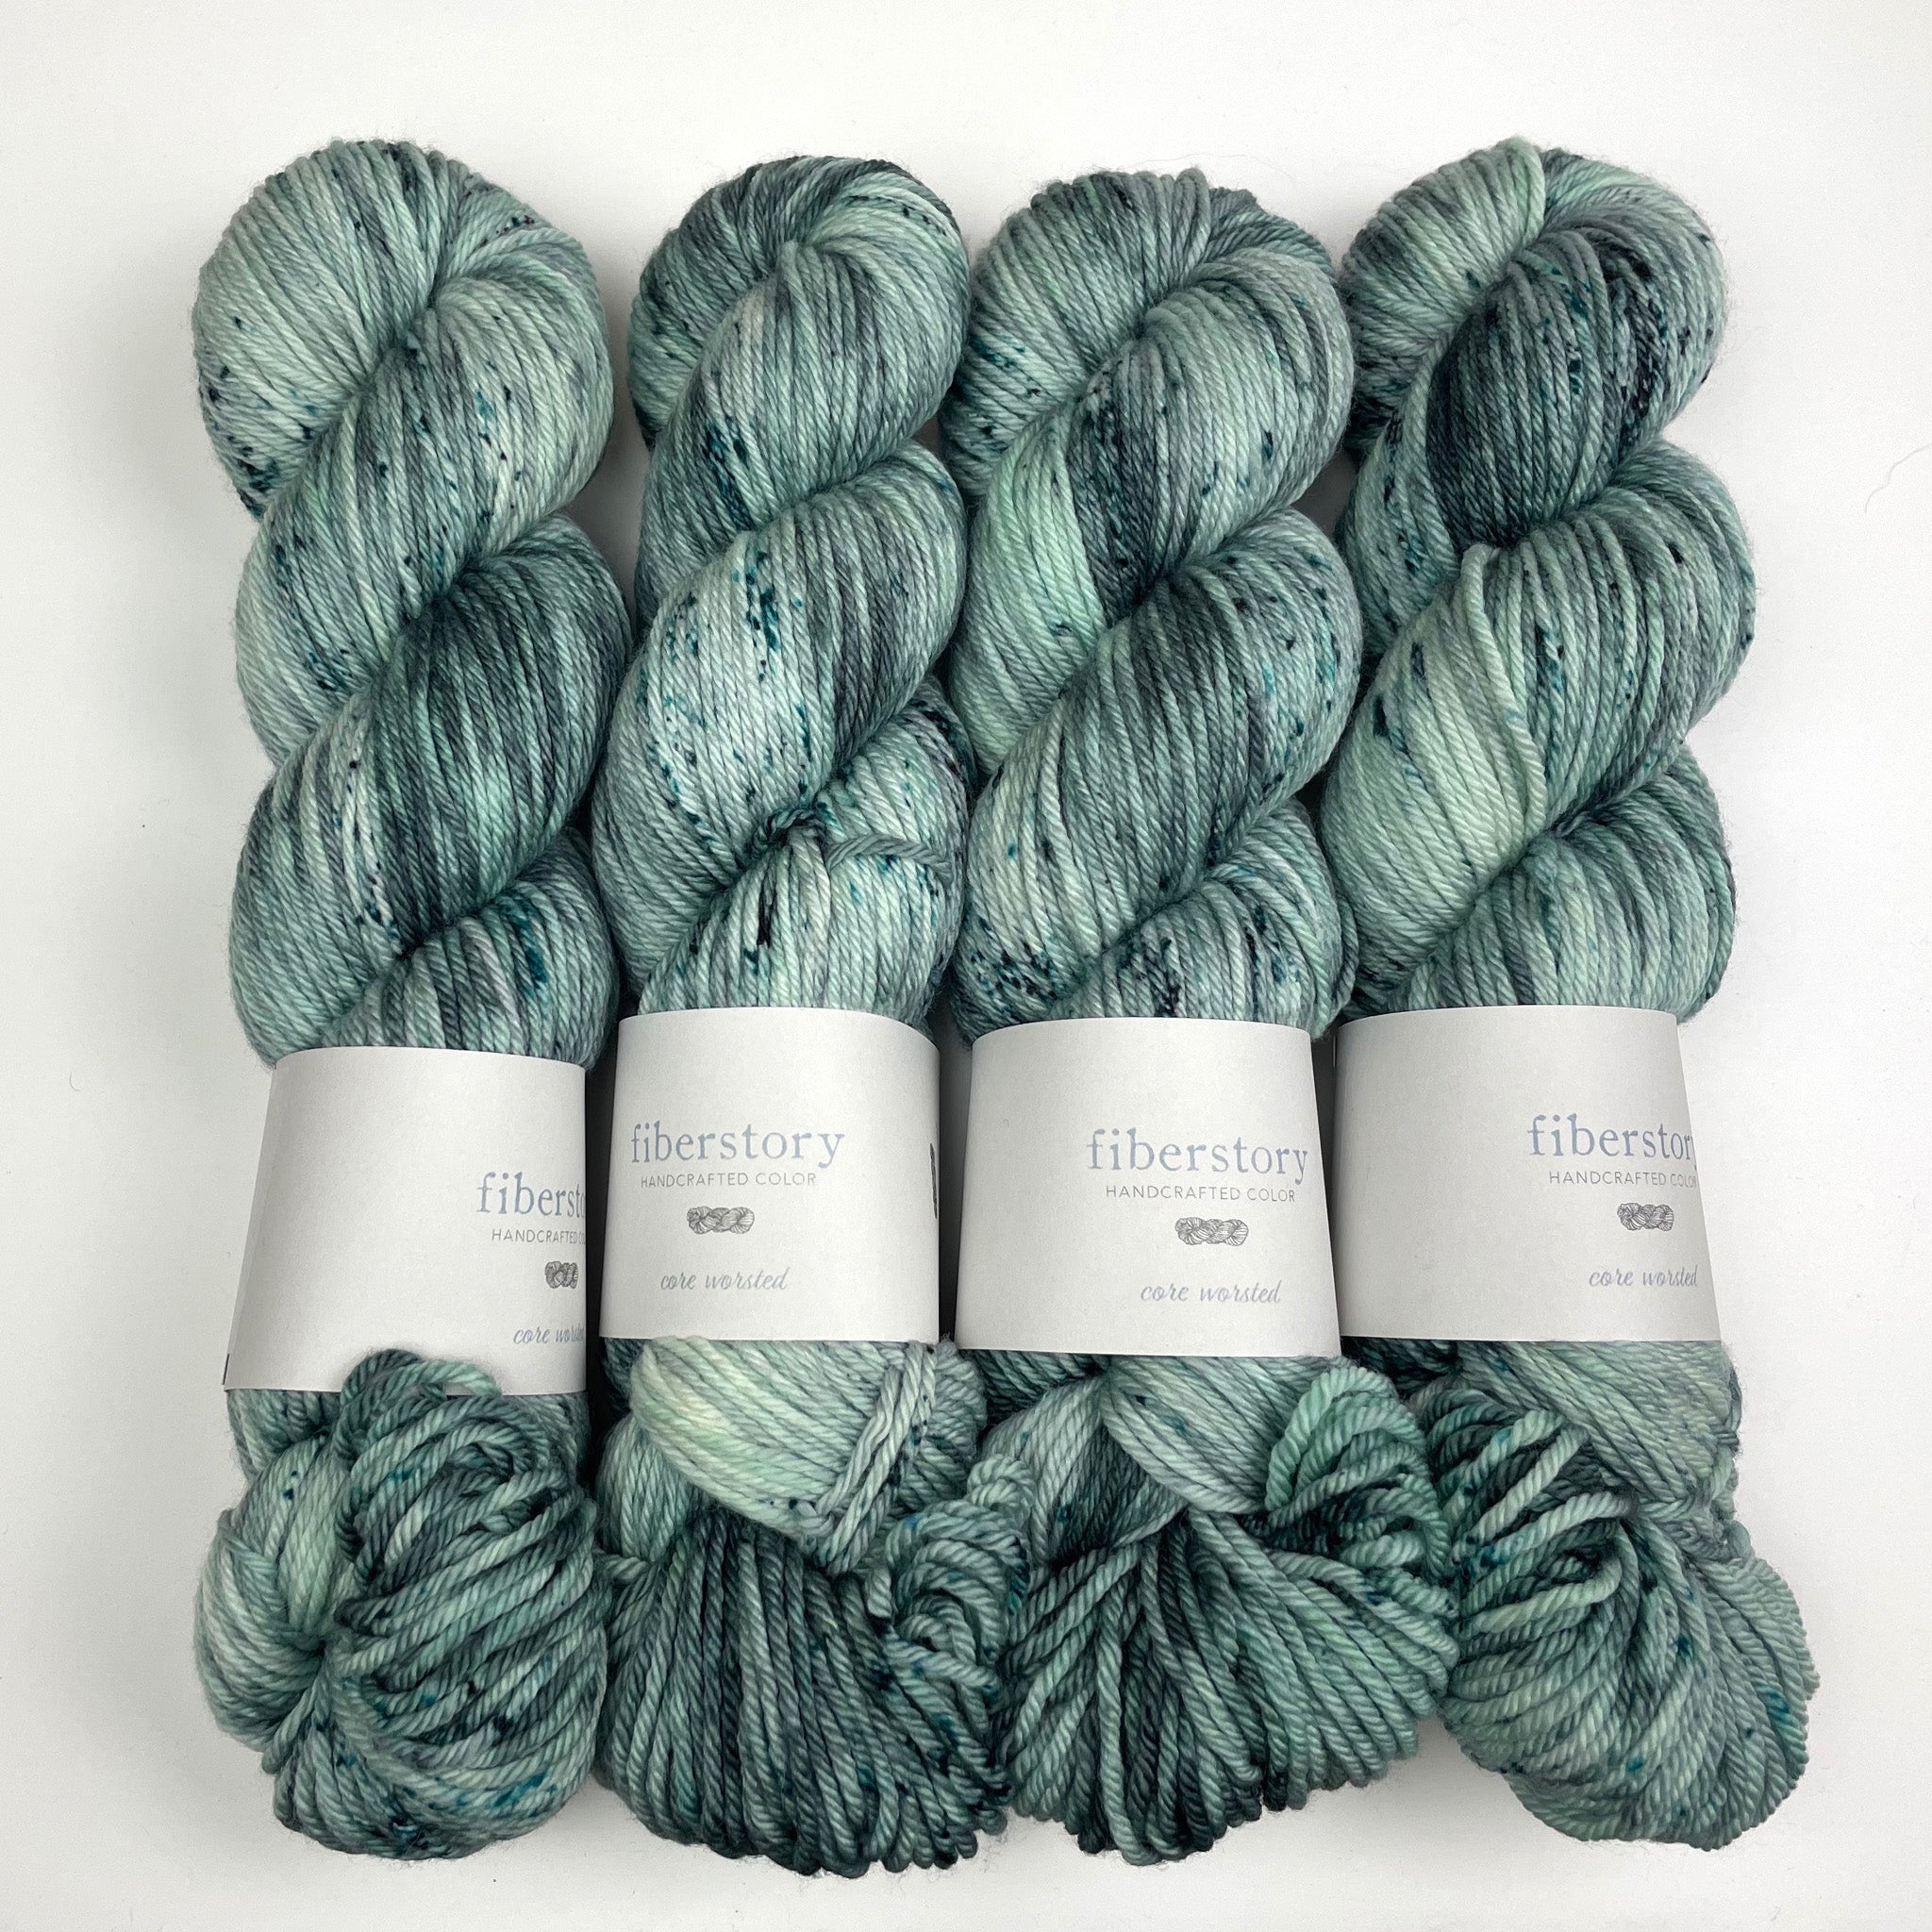 Flurry, CORE worsted